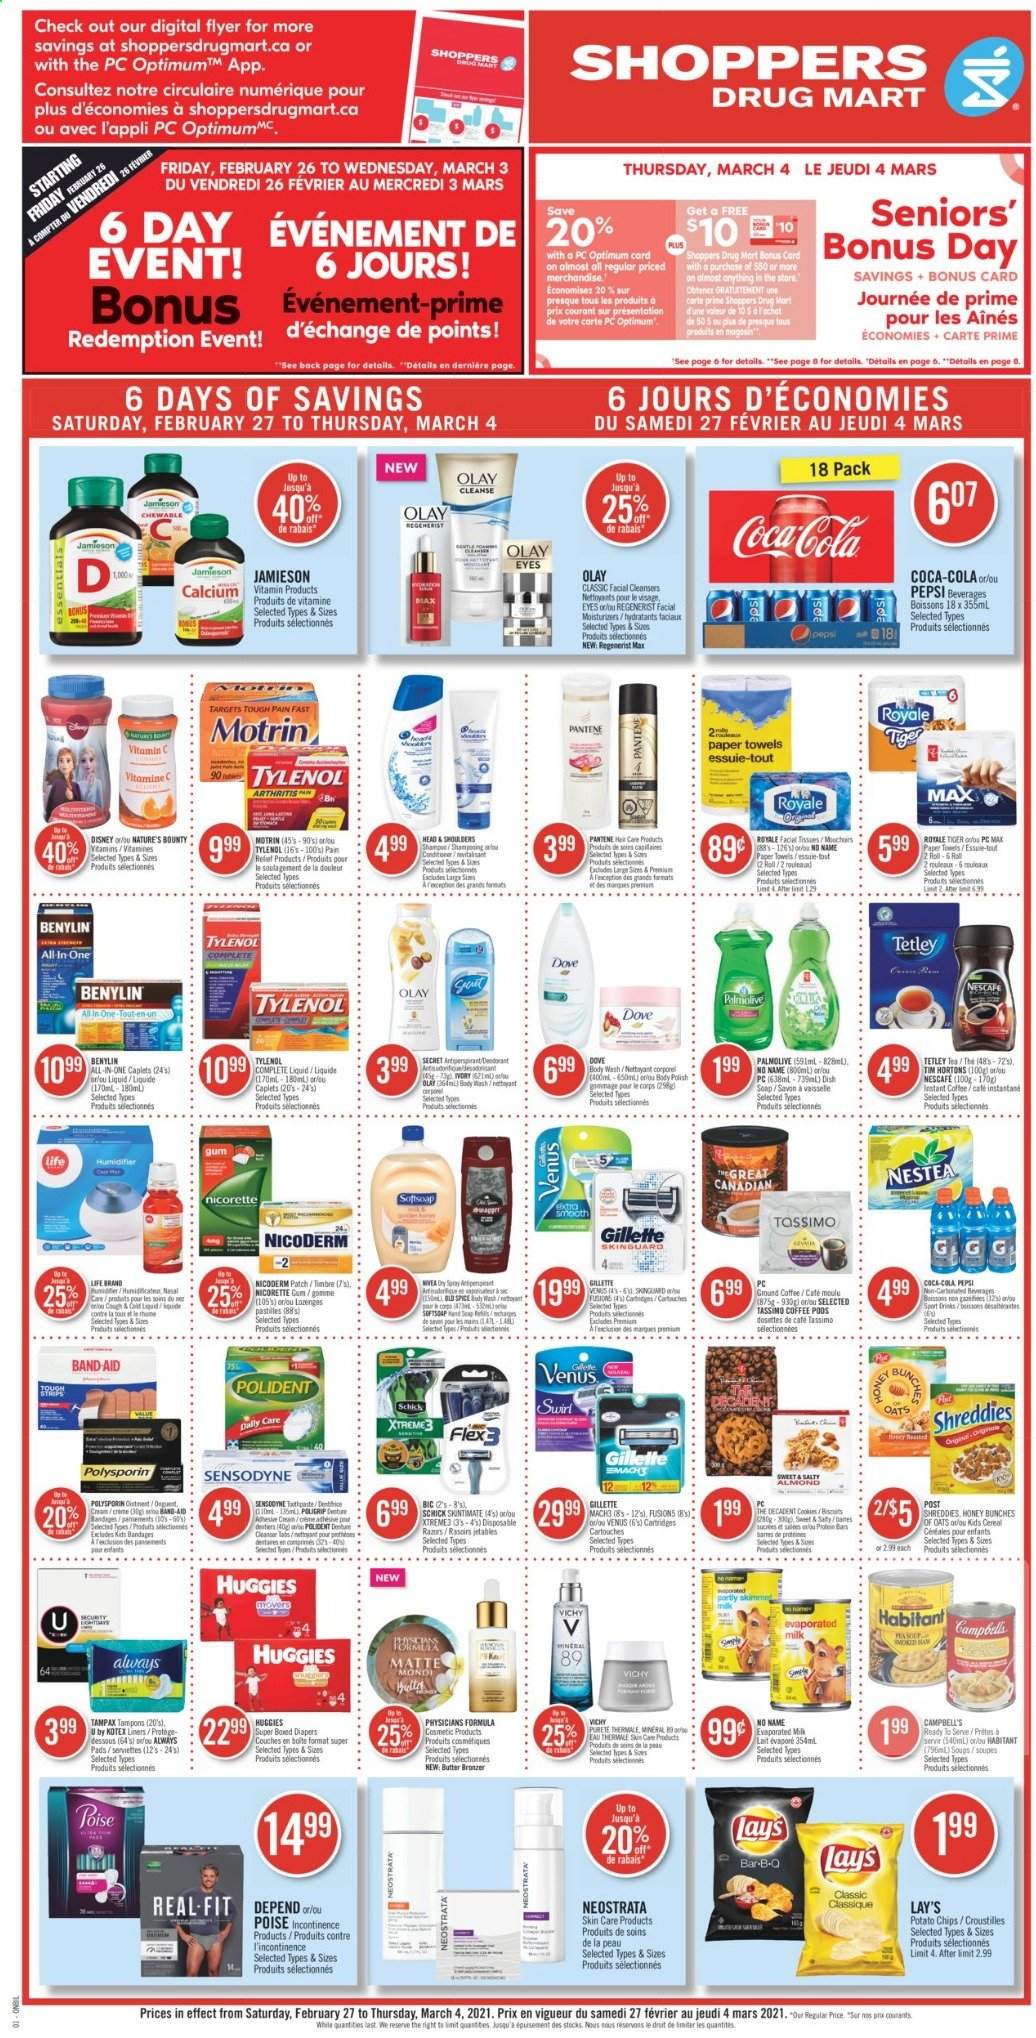 thumbnail - Shoppers Drug Mart Flyer - February 27, 2021 - March 04, 2021 - Sales products - Bounty, Mars, biscuit, pastilles, potato chips, Lay’s, cereals, protein bar, spice, Coca-Cola, Pepsi, tea, coffee pods, nappies, Disney, tissues, kitchen towels, paper towels, body wash, Softsoap, Vichy, hand soap, Palmolive, soap, Polident, Always pads, Kotex, tampons, facial tissues, moisturizer, Olay, conditioner, anti-perspirant, BIC, Schick, Venus, disposable razor, polish, bronzing powder, NicoDerm, Nicorette, Tylenol, vitamin c, Nicorette Gum, Benylin, Motrin, Gillette, Head & Shoulders, Huggies, Pantene, Old Spice, chips, Sensodyne, Nescafé, deodorant. Page 1.